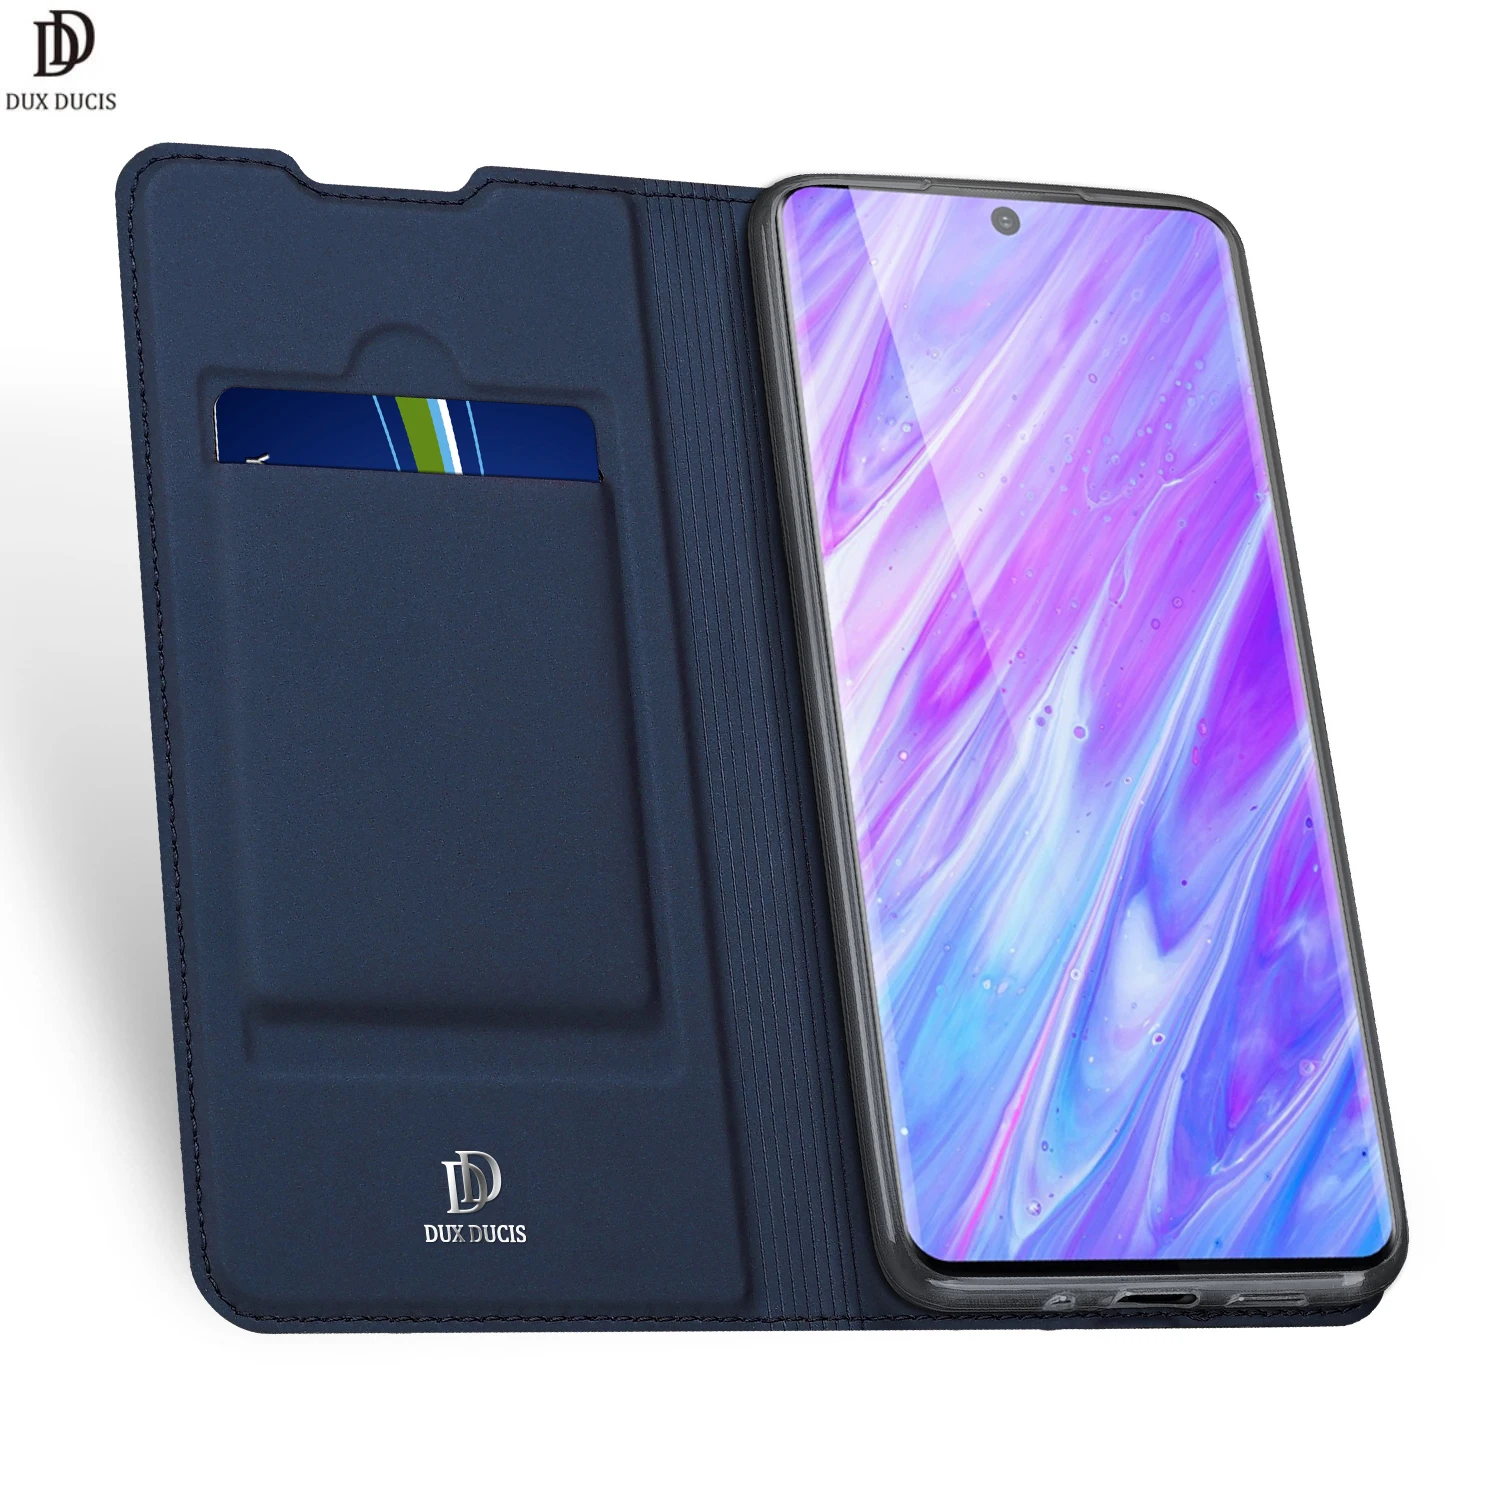 

For Samsung Galaxy S20 Plus DUX DUCIS Skin Pro Series Leather Wallet Flip Case Full Protection Steady Stand Magnetic Closure